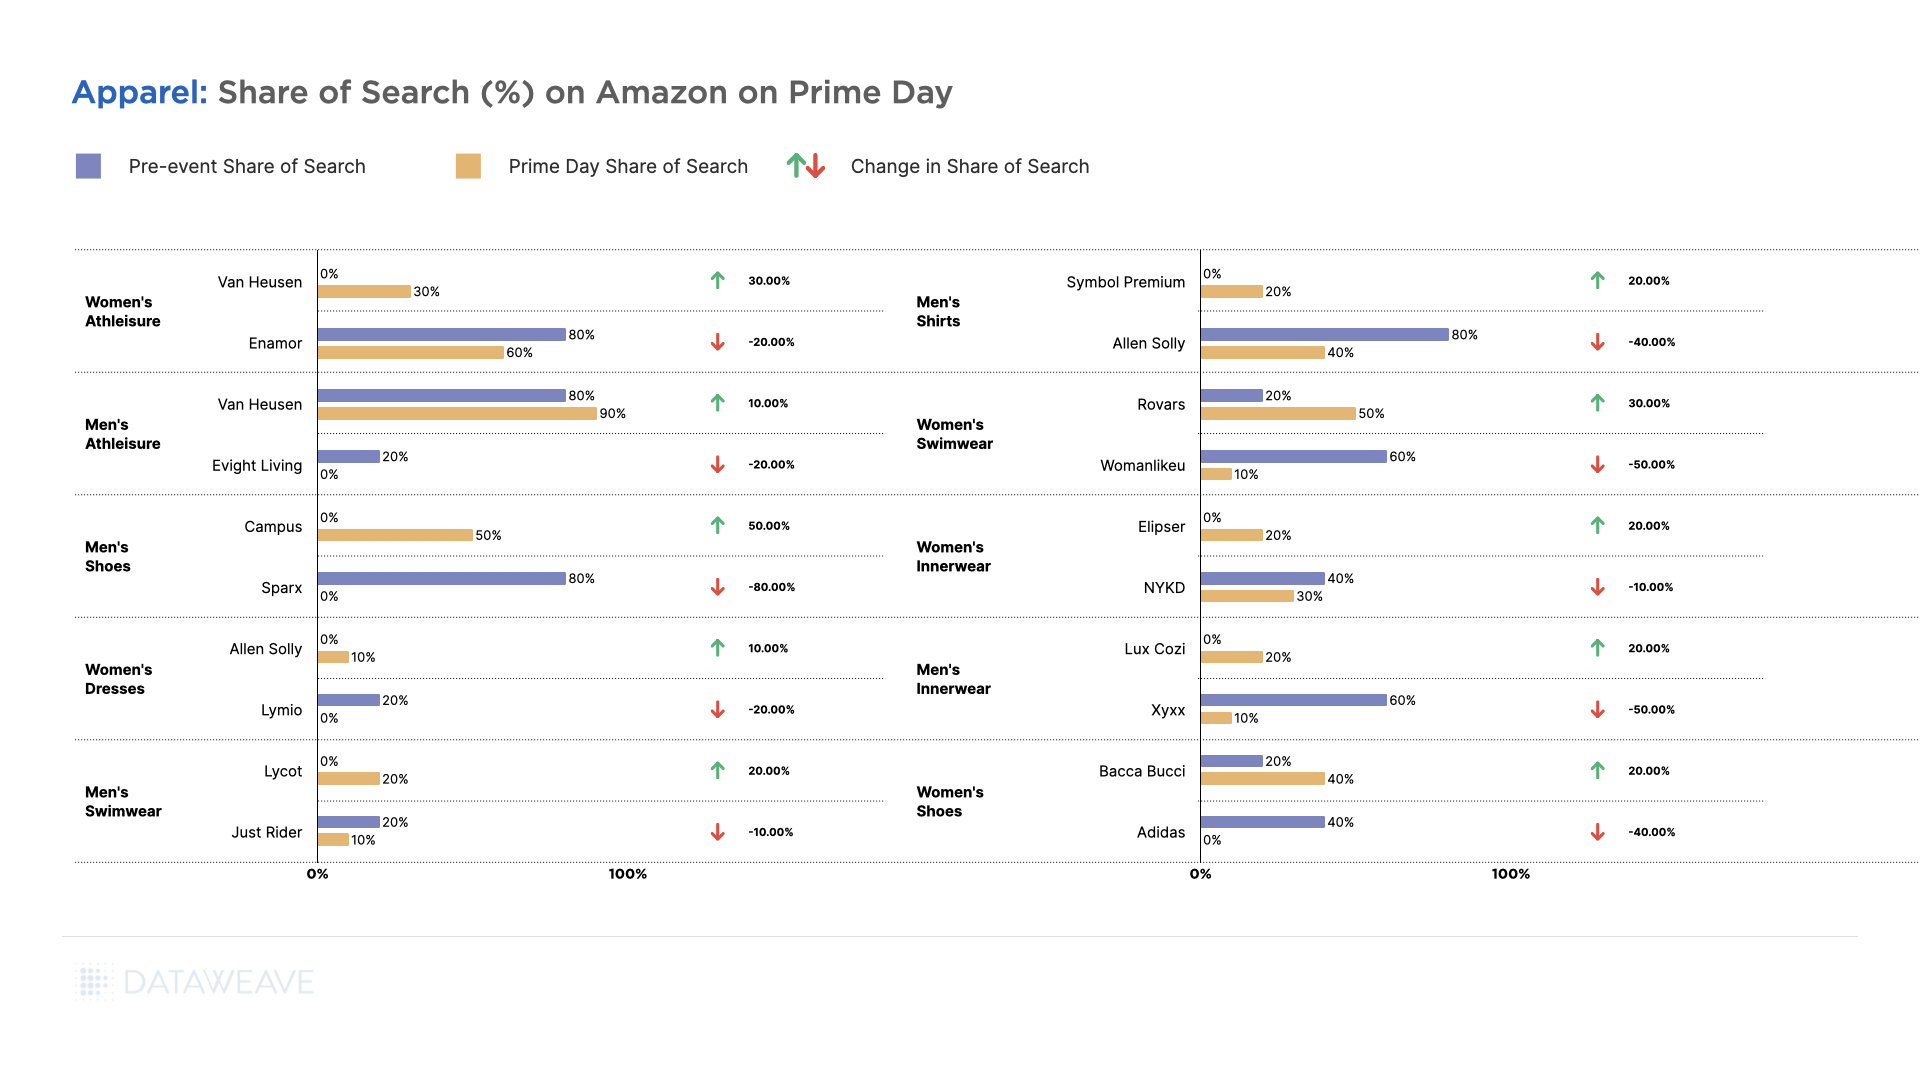 Apparel share of search on Amazon on Prime Day.